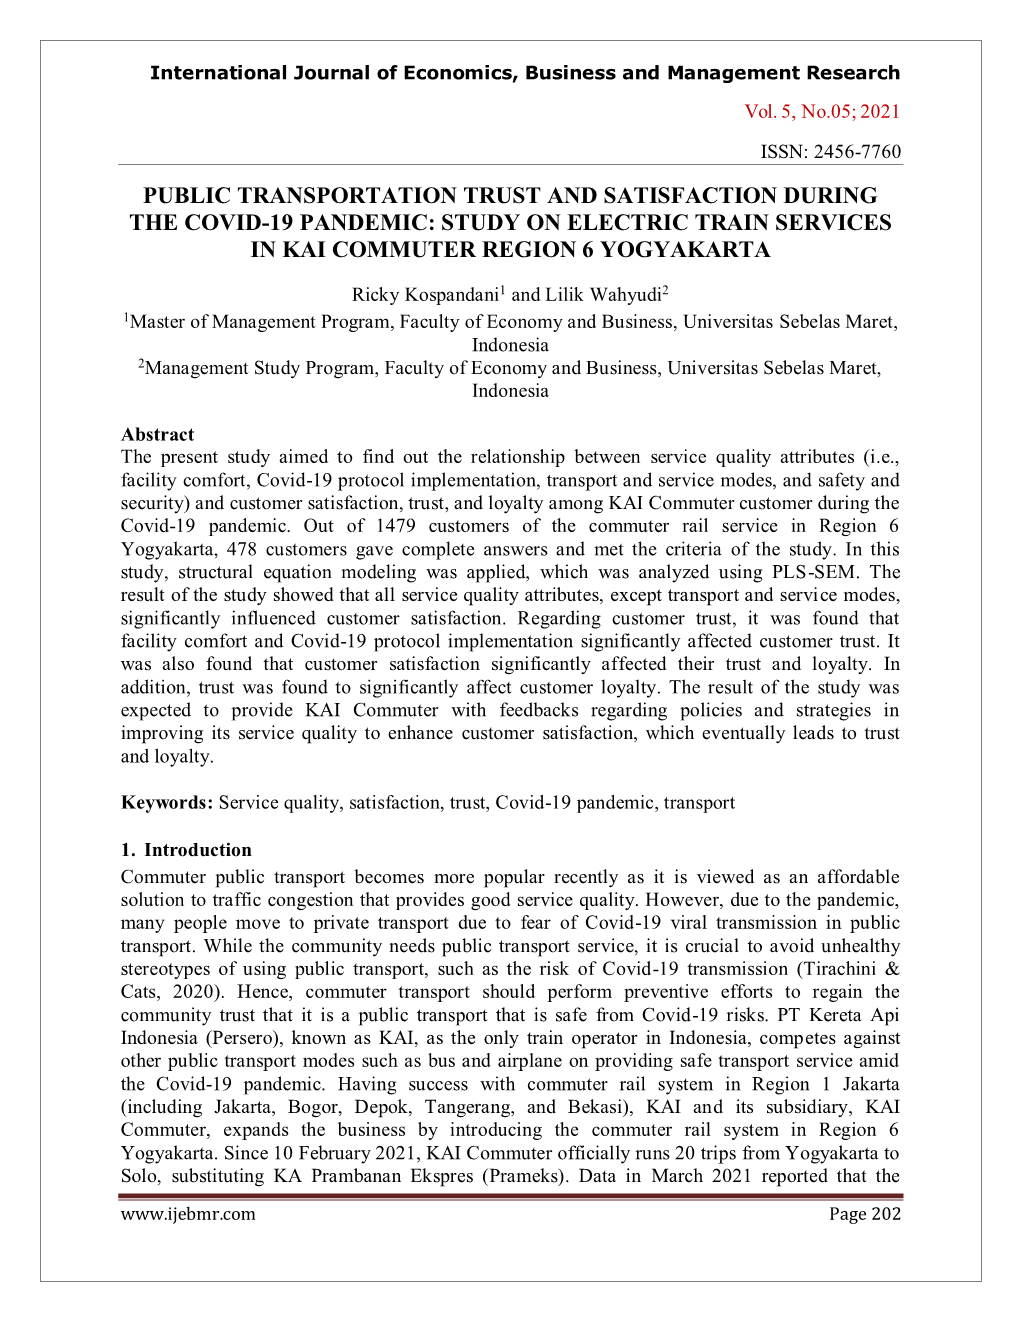 Public Transportation Trust and Satisfaction During the Covid-19 Pandemic: Study on Electric Train Services in Kai Commuter Region 6 Yogyakarta